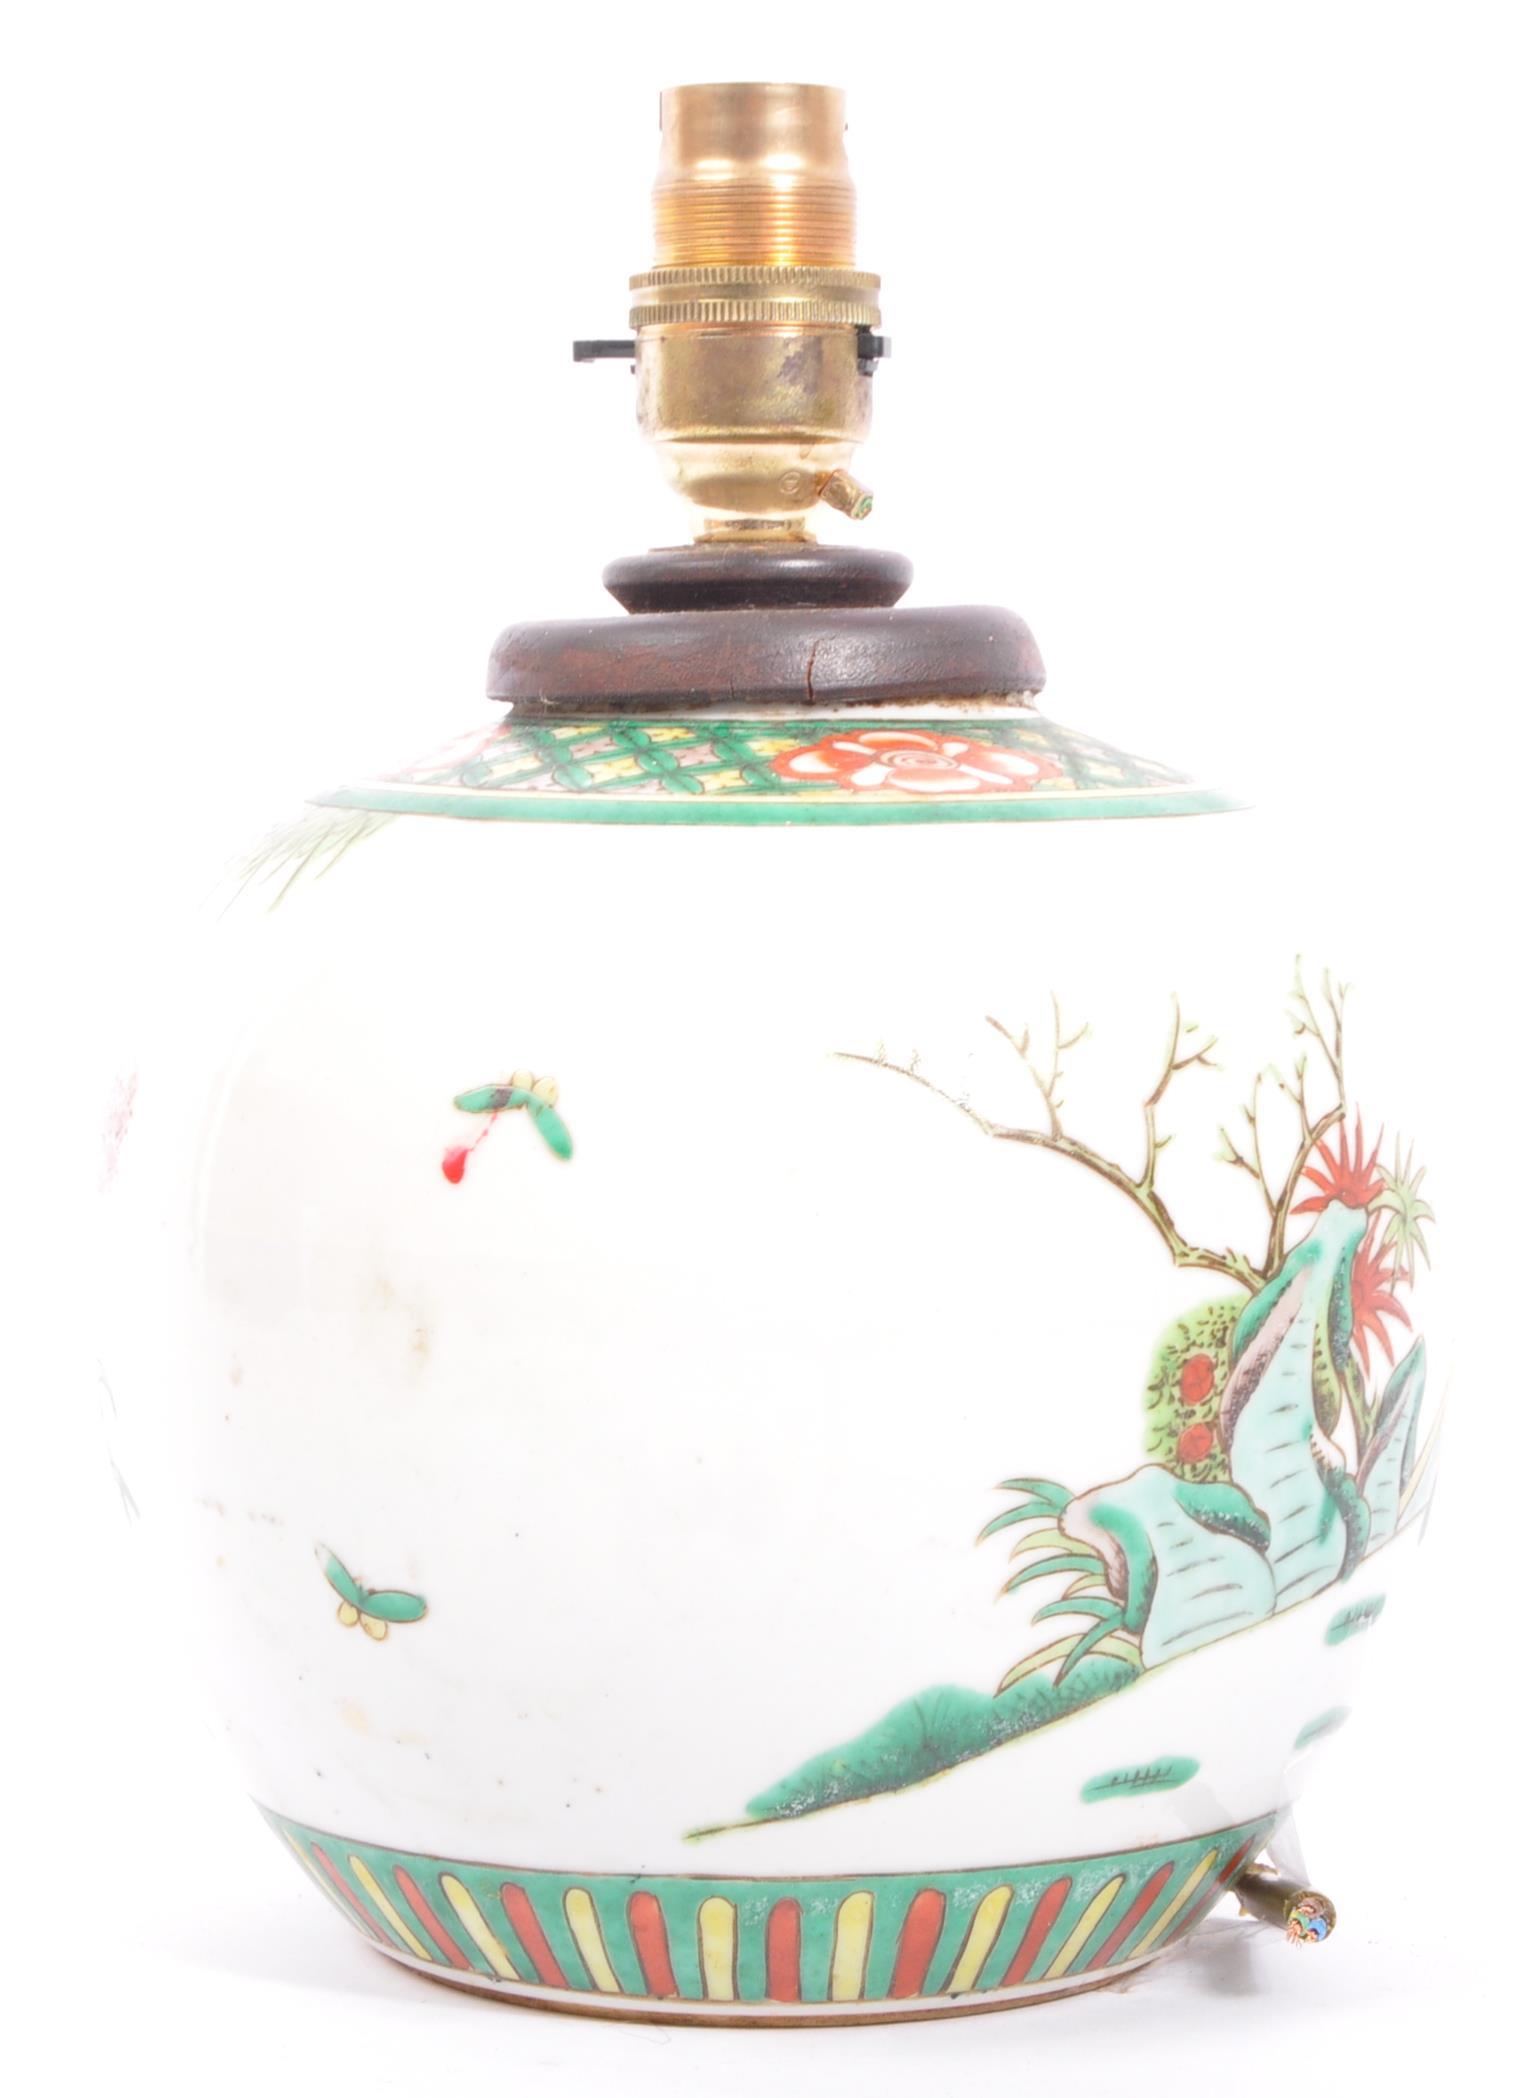 MID 20TH CENTURY FAMILLE ROSE HAND PAINTED VASE LAMP - Image 3 of 6